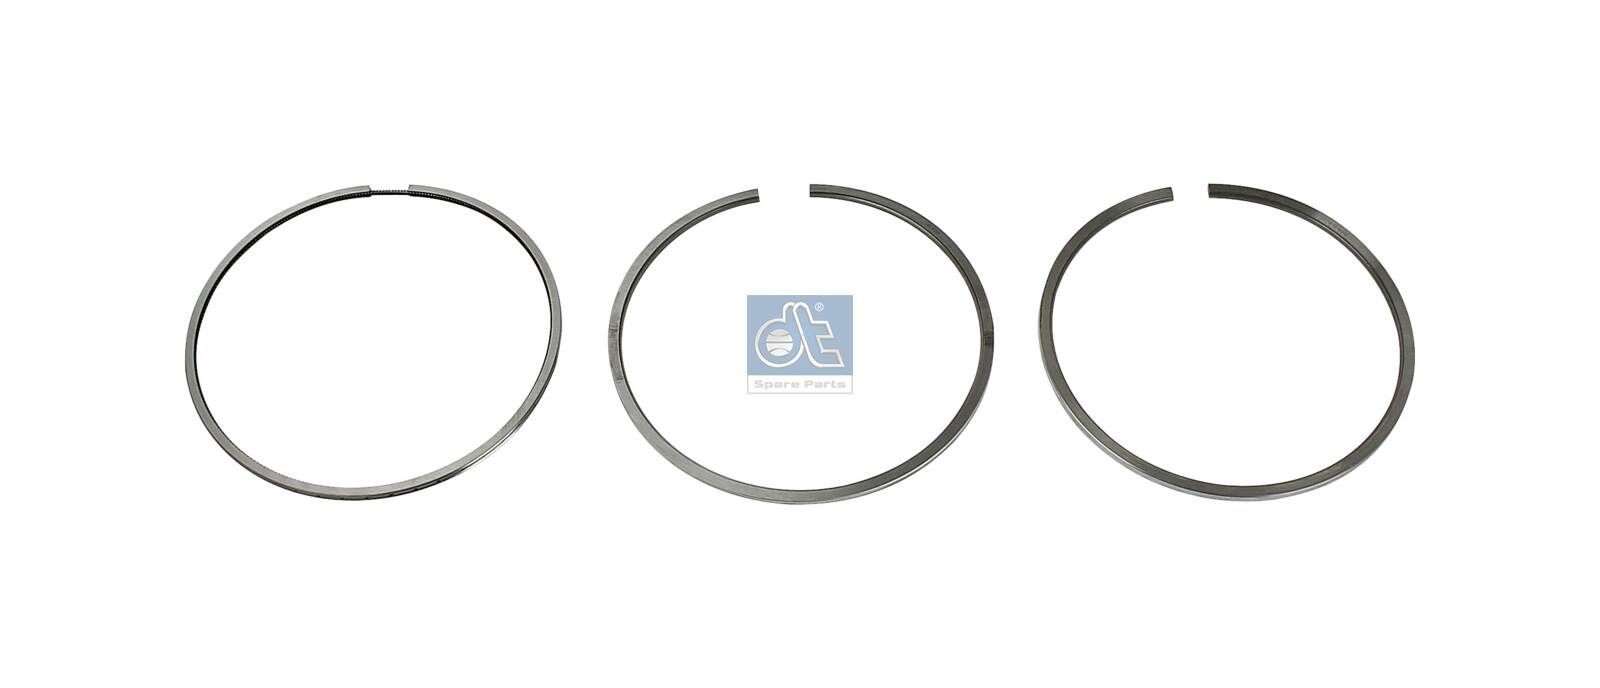 061 77 N0 DT Spare Parts 1.33130 Piston Ring Kit 1798722